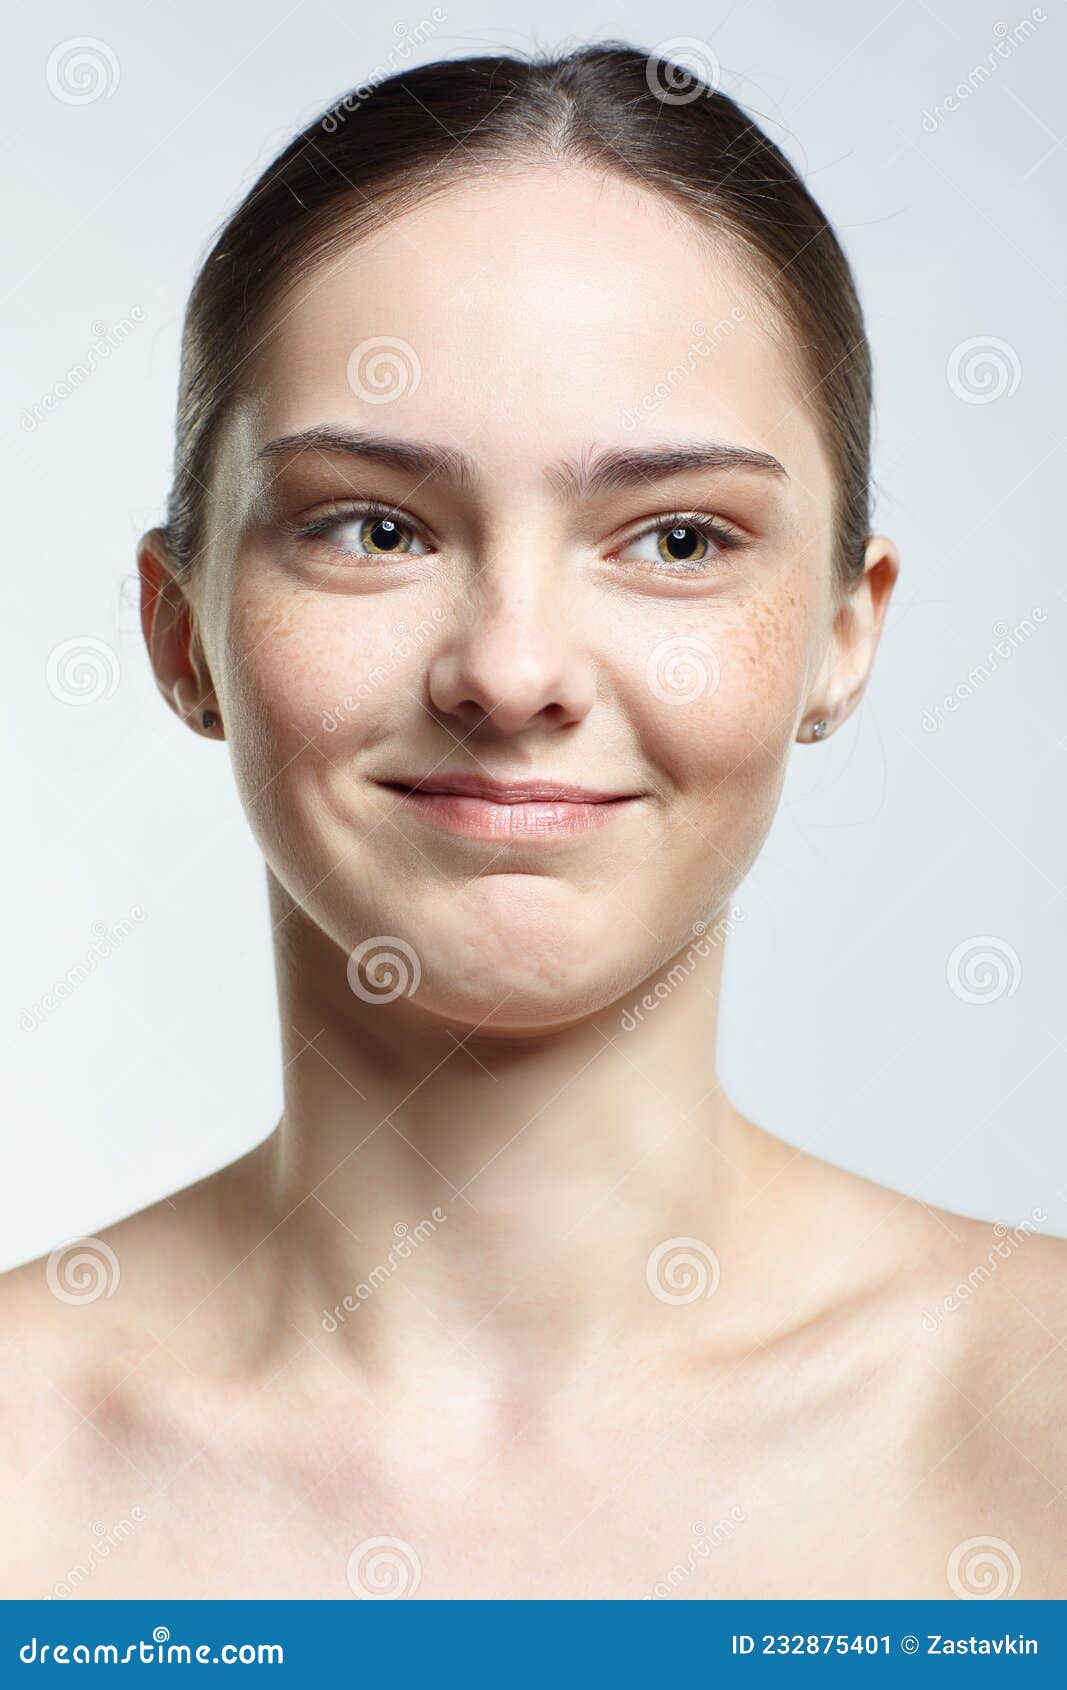 Headshot Of Emotional Female Face Portrait With Cheerful Facial